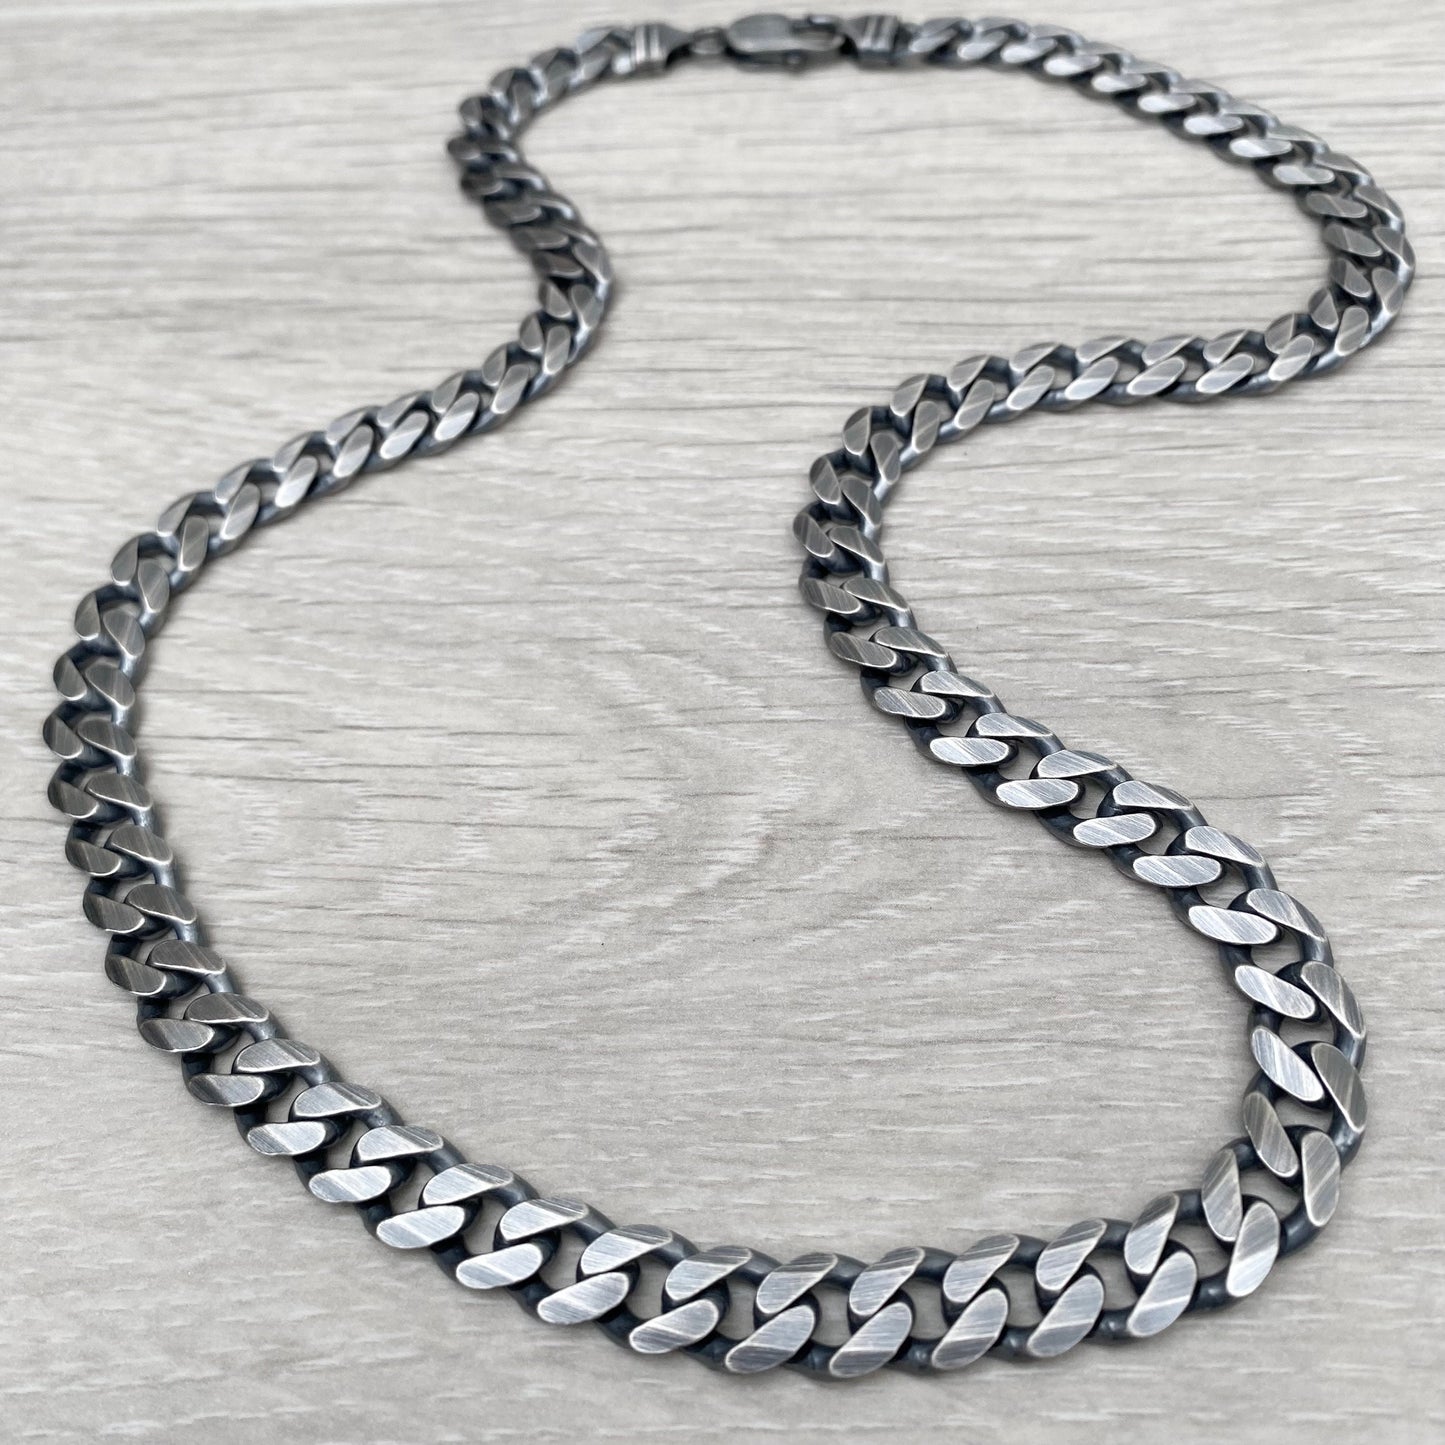 Men's oxidised heavy silver curb chain - 80g - 9.2mm wide - 22 inch length